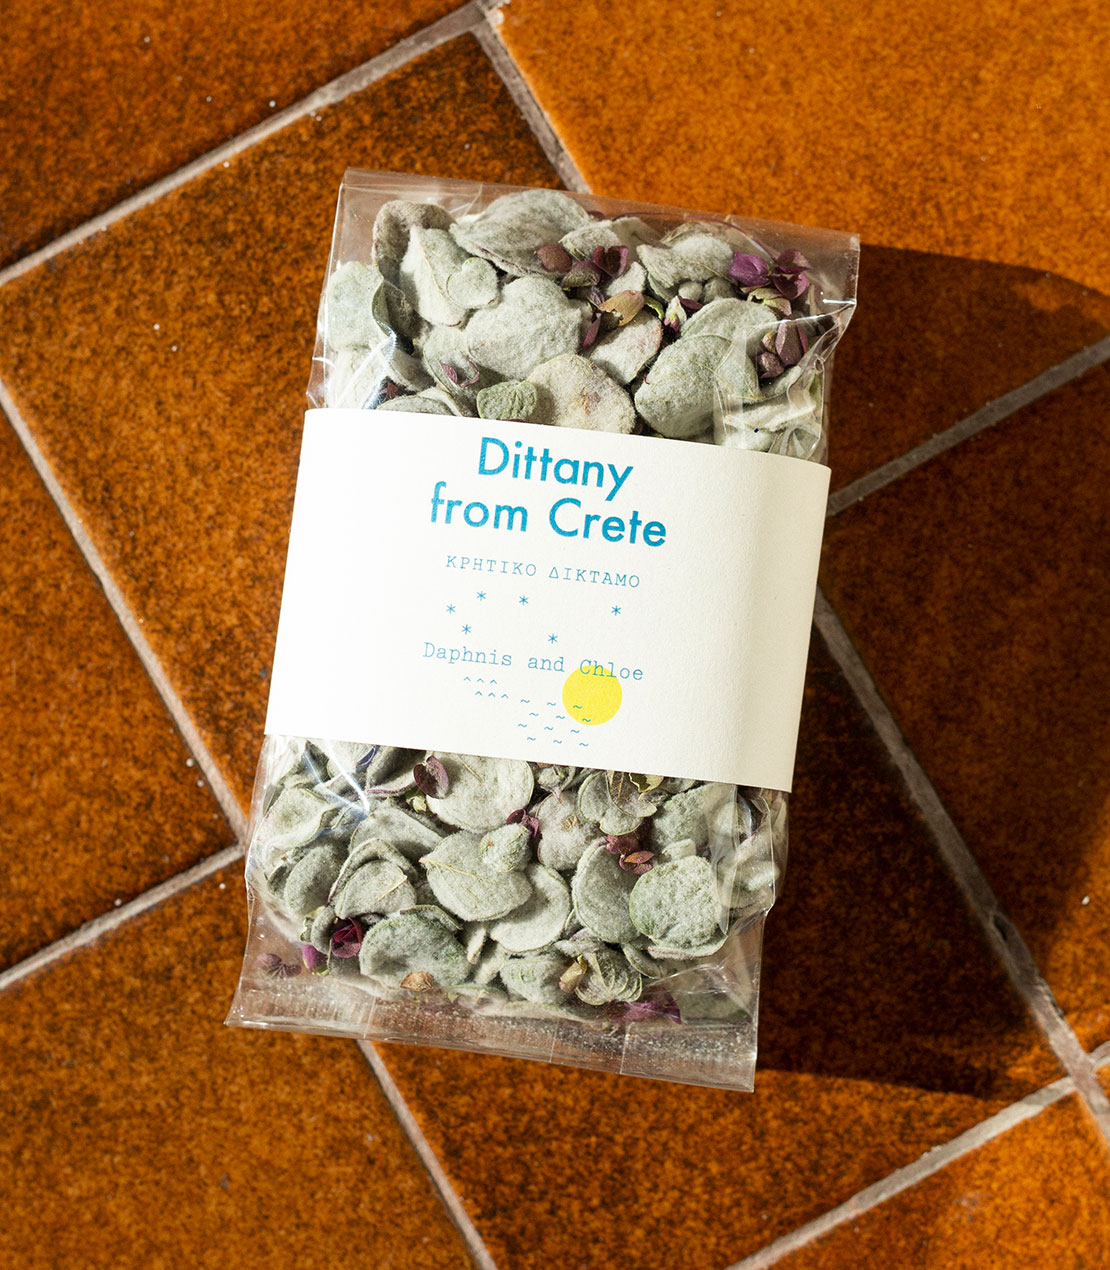 Dittany from Crete sachet